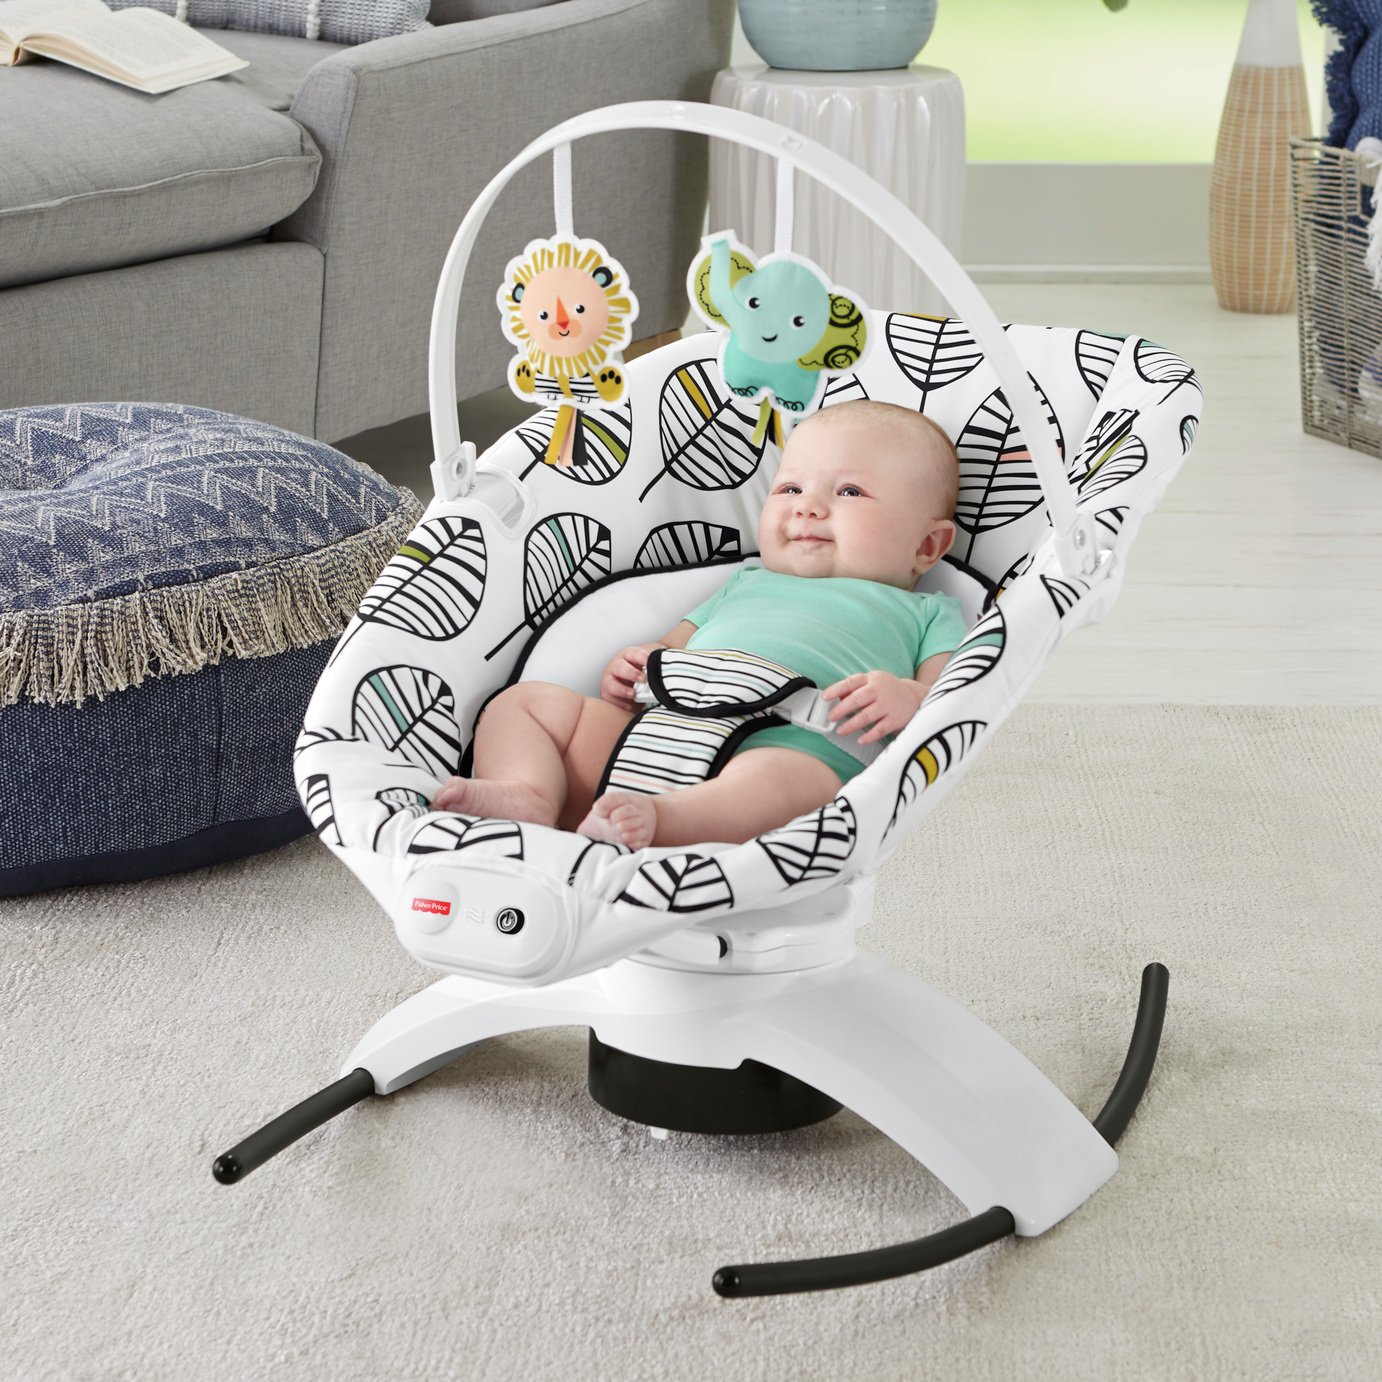 Fisher-Price 2-in-1 Soothe 'n Play Glider Review